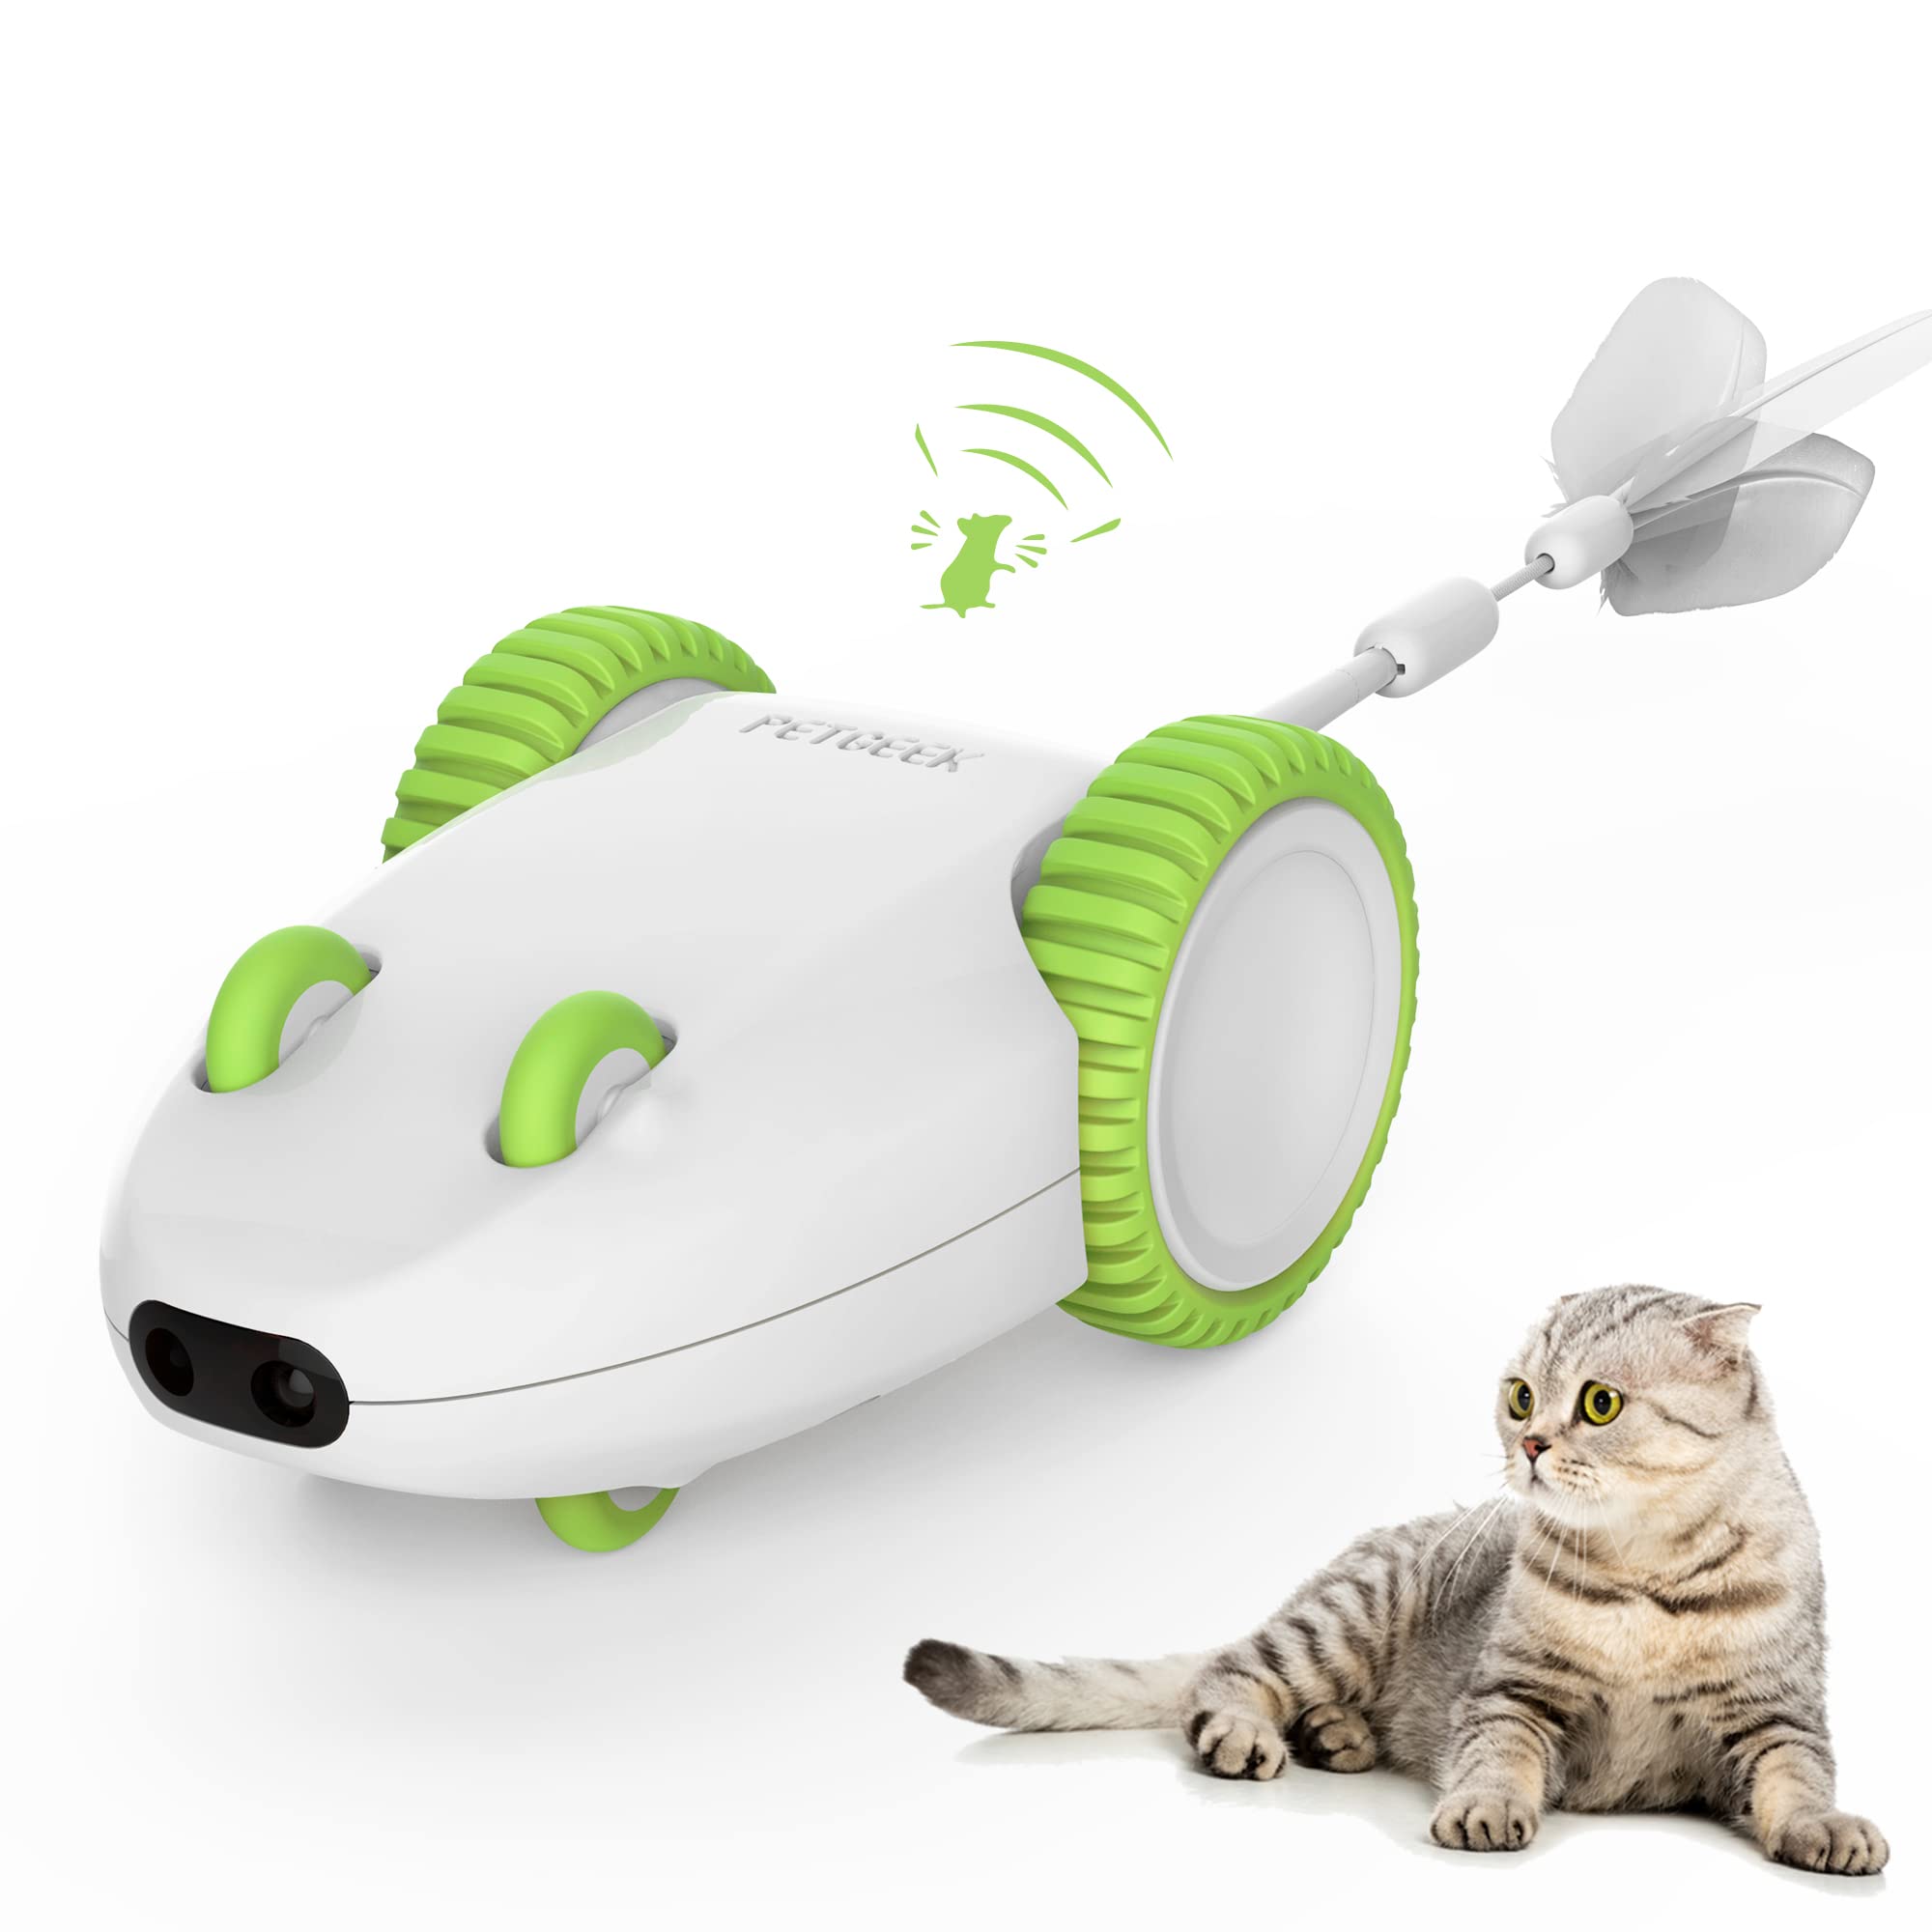 Petgeek Automatic Cat Toys, Smart Interactive Cat Toy, Rechargeable Electronic Cat Mouse Toys With Cat Catnip Wand, Cat Toys For